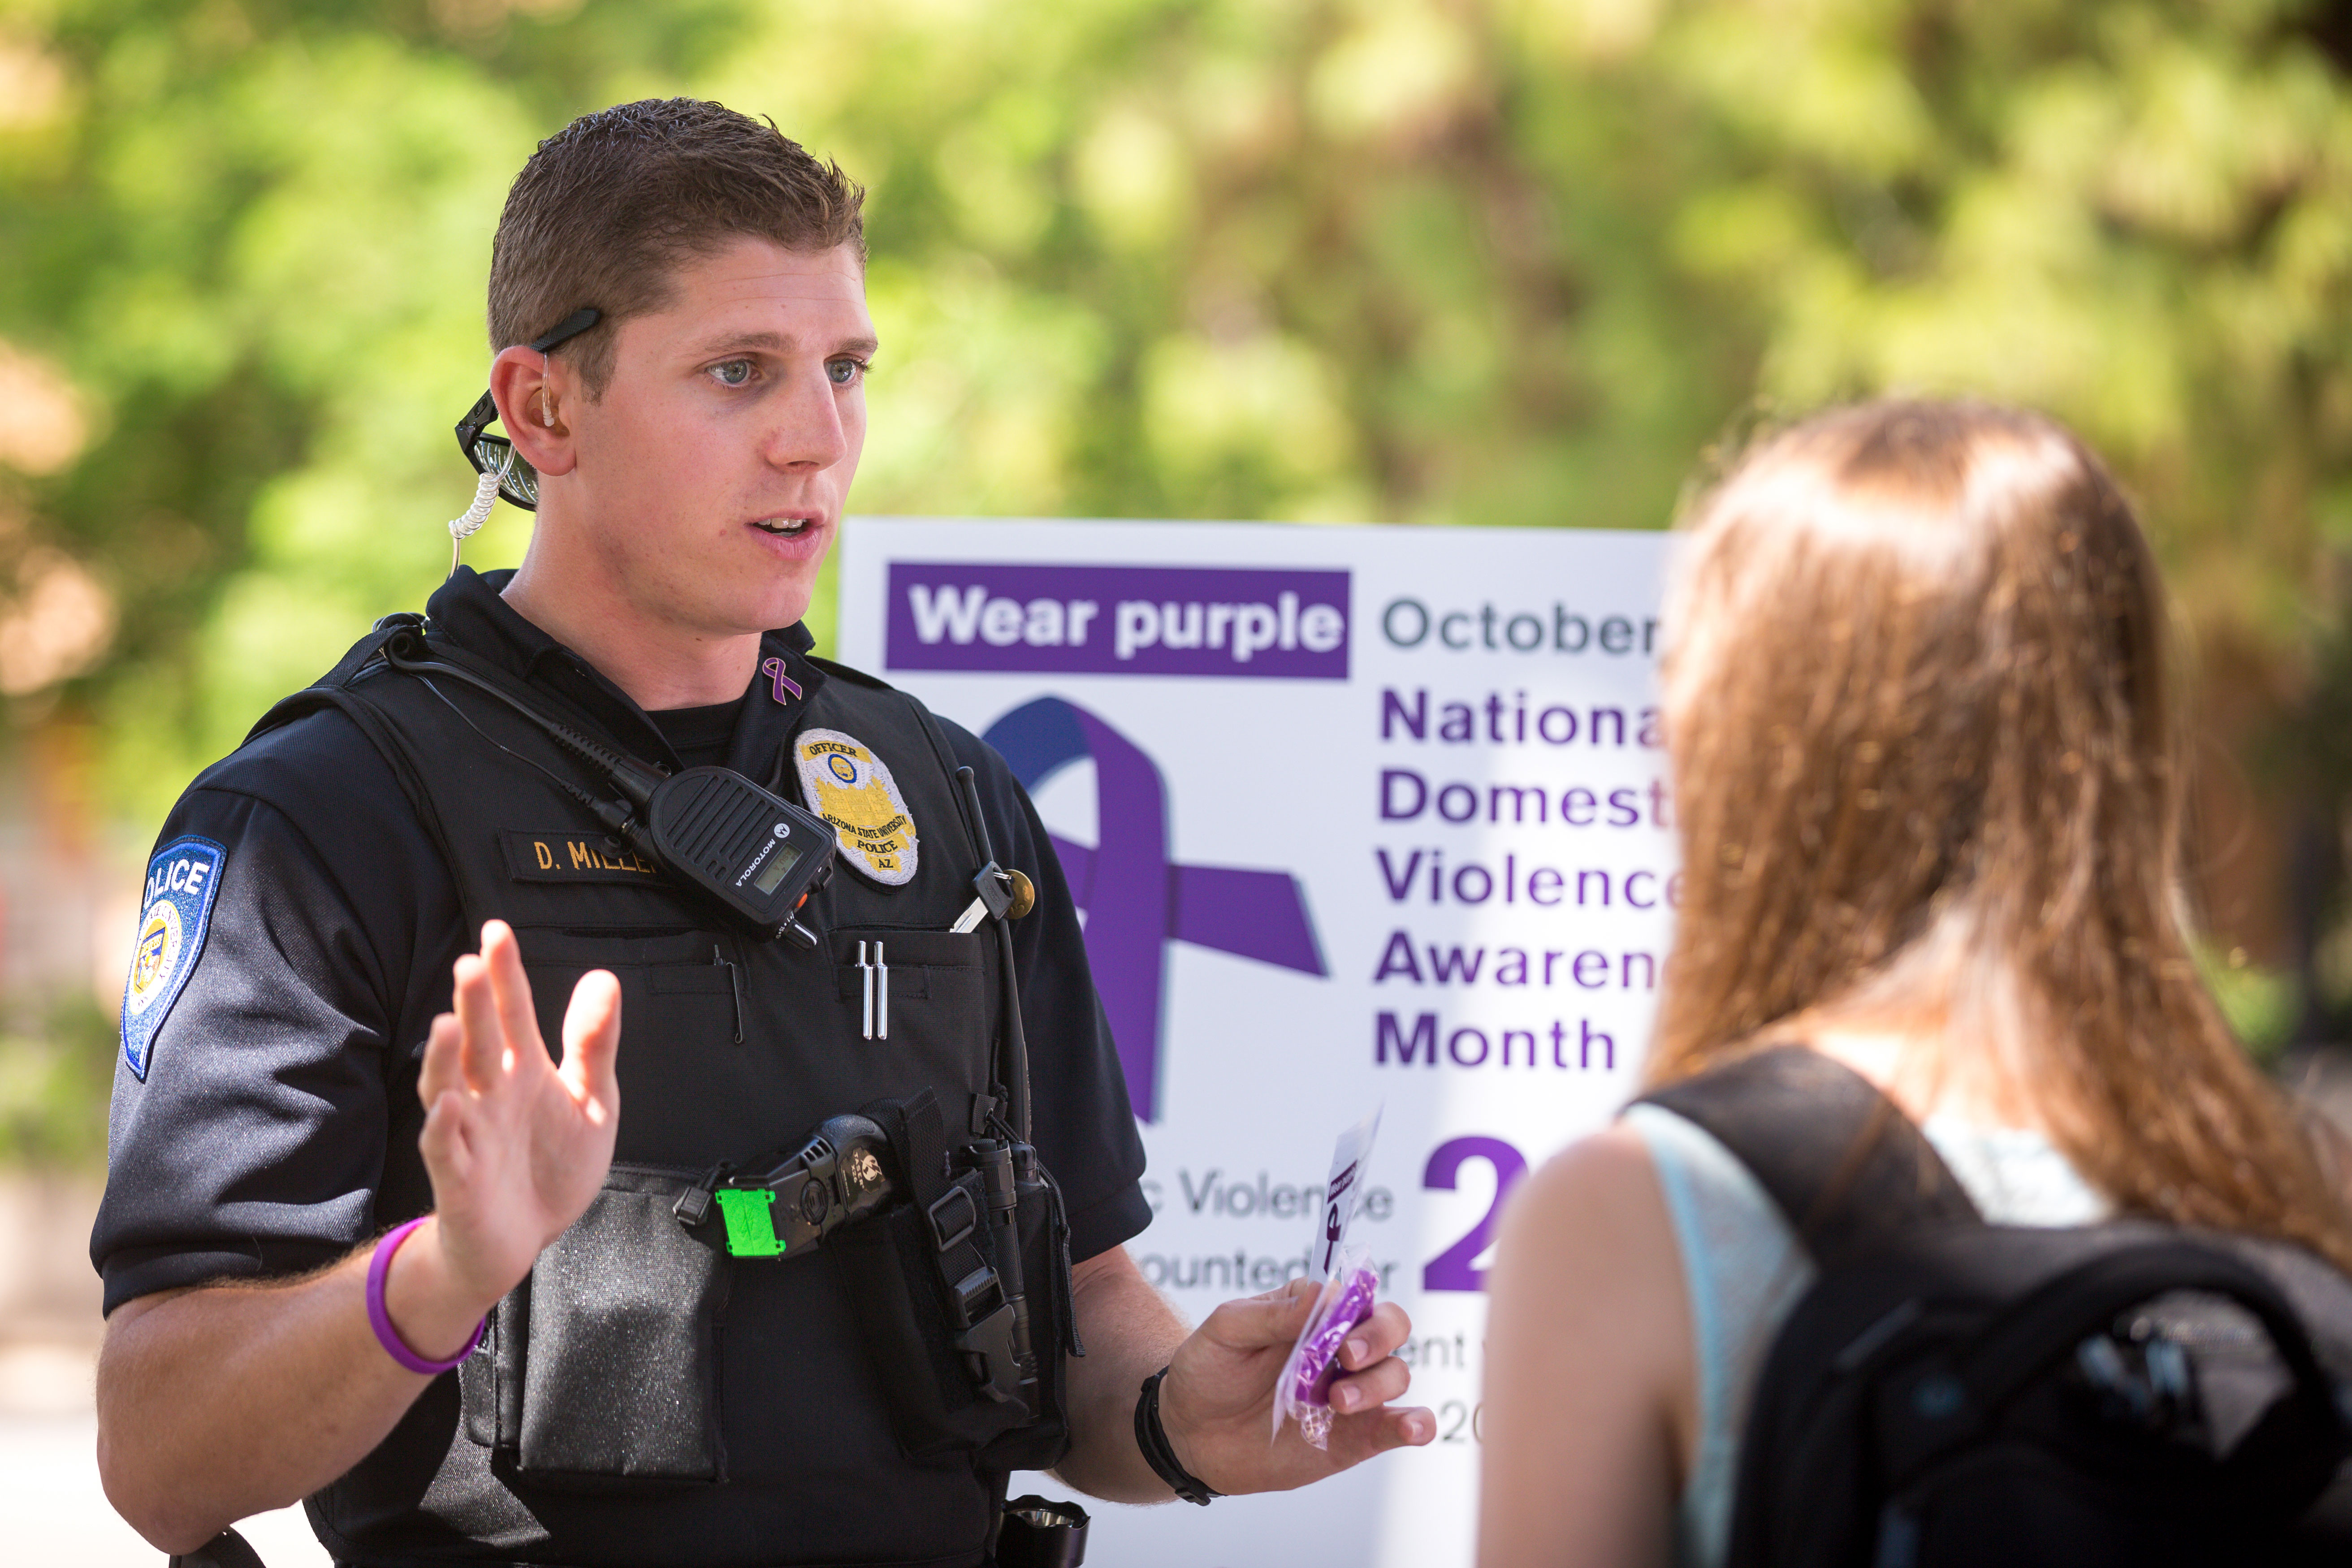 Domestic Violence Awareness Month Image